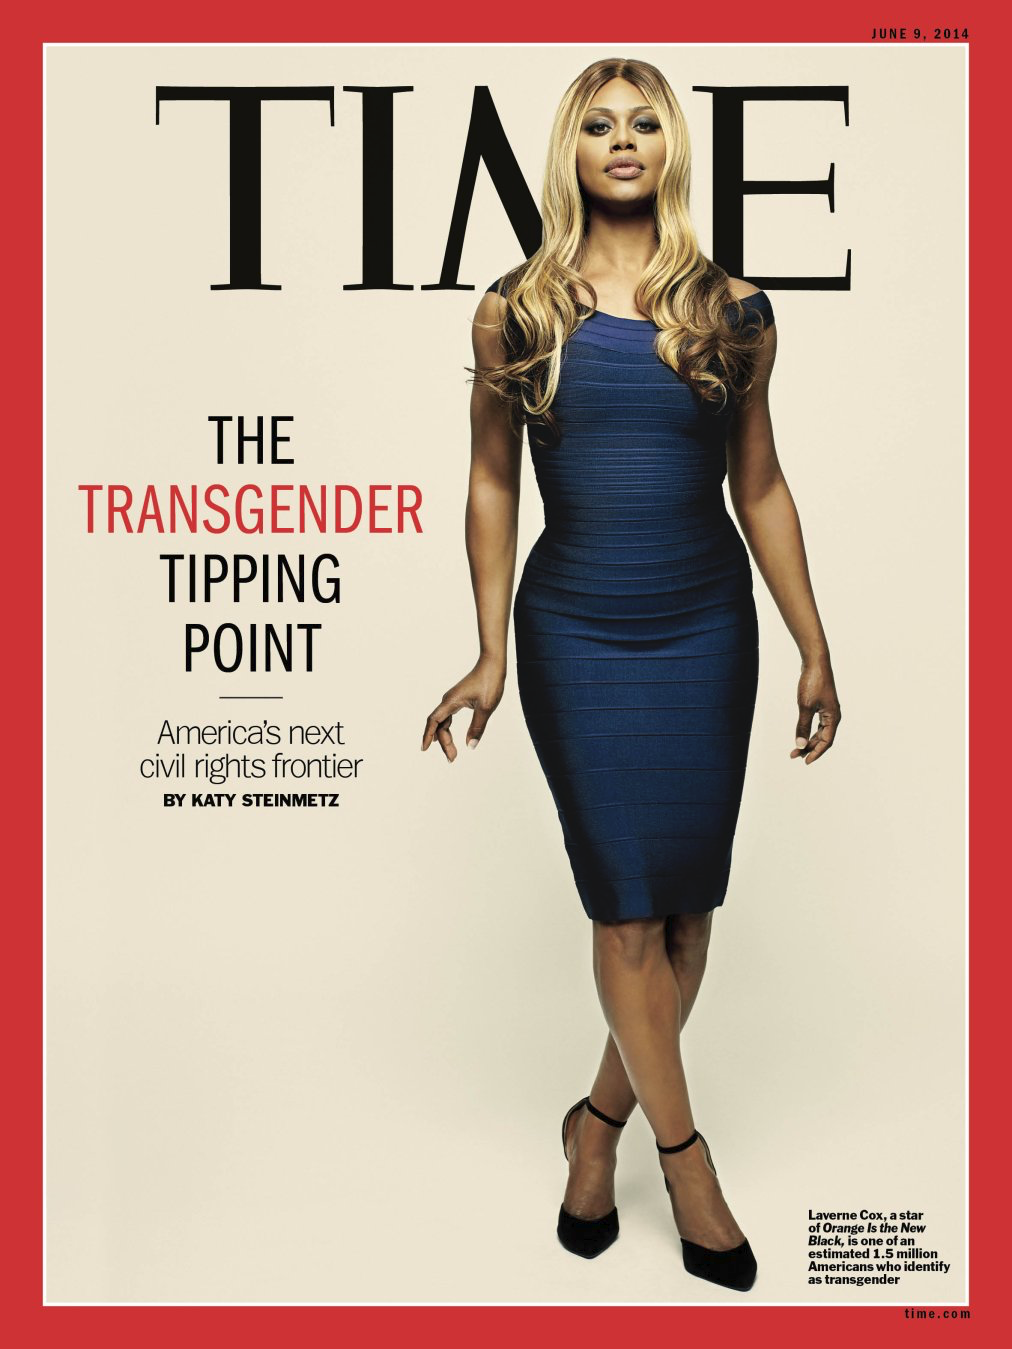 Laverne Cox on the cover of Time Magazine, 2014.